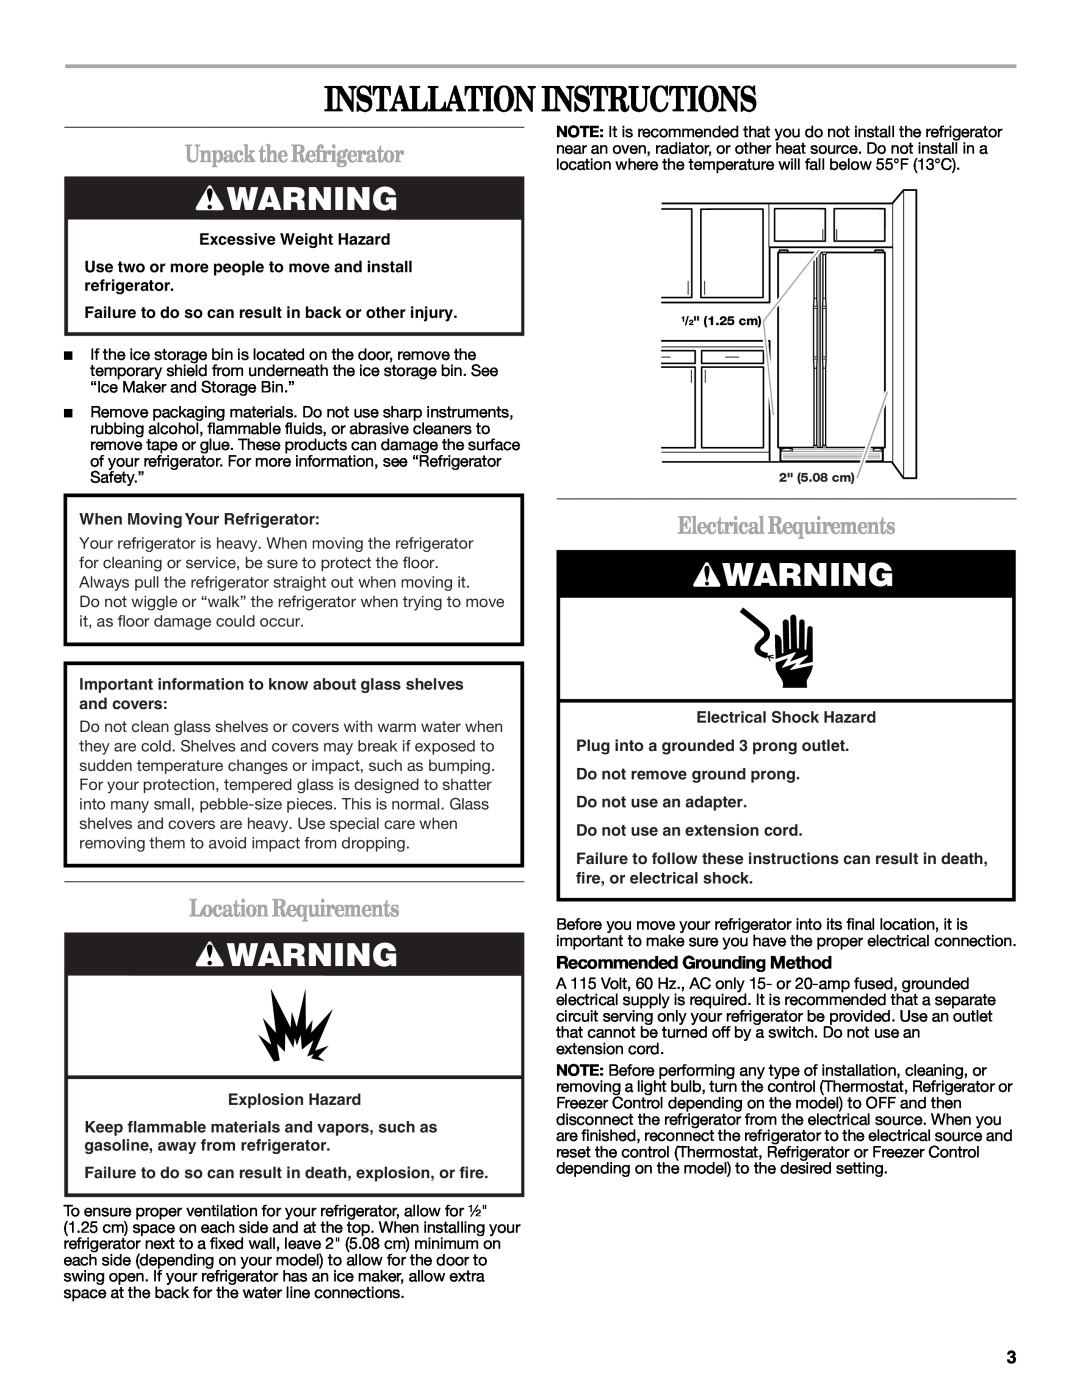 Whirlpool ED2JHGXRB00 Installation Instructions, UnpacktheRefrigerator, LocationRequirements, Electrical Requirements 